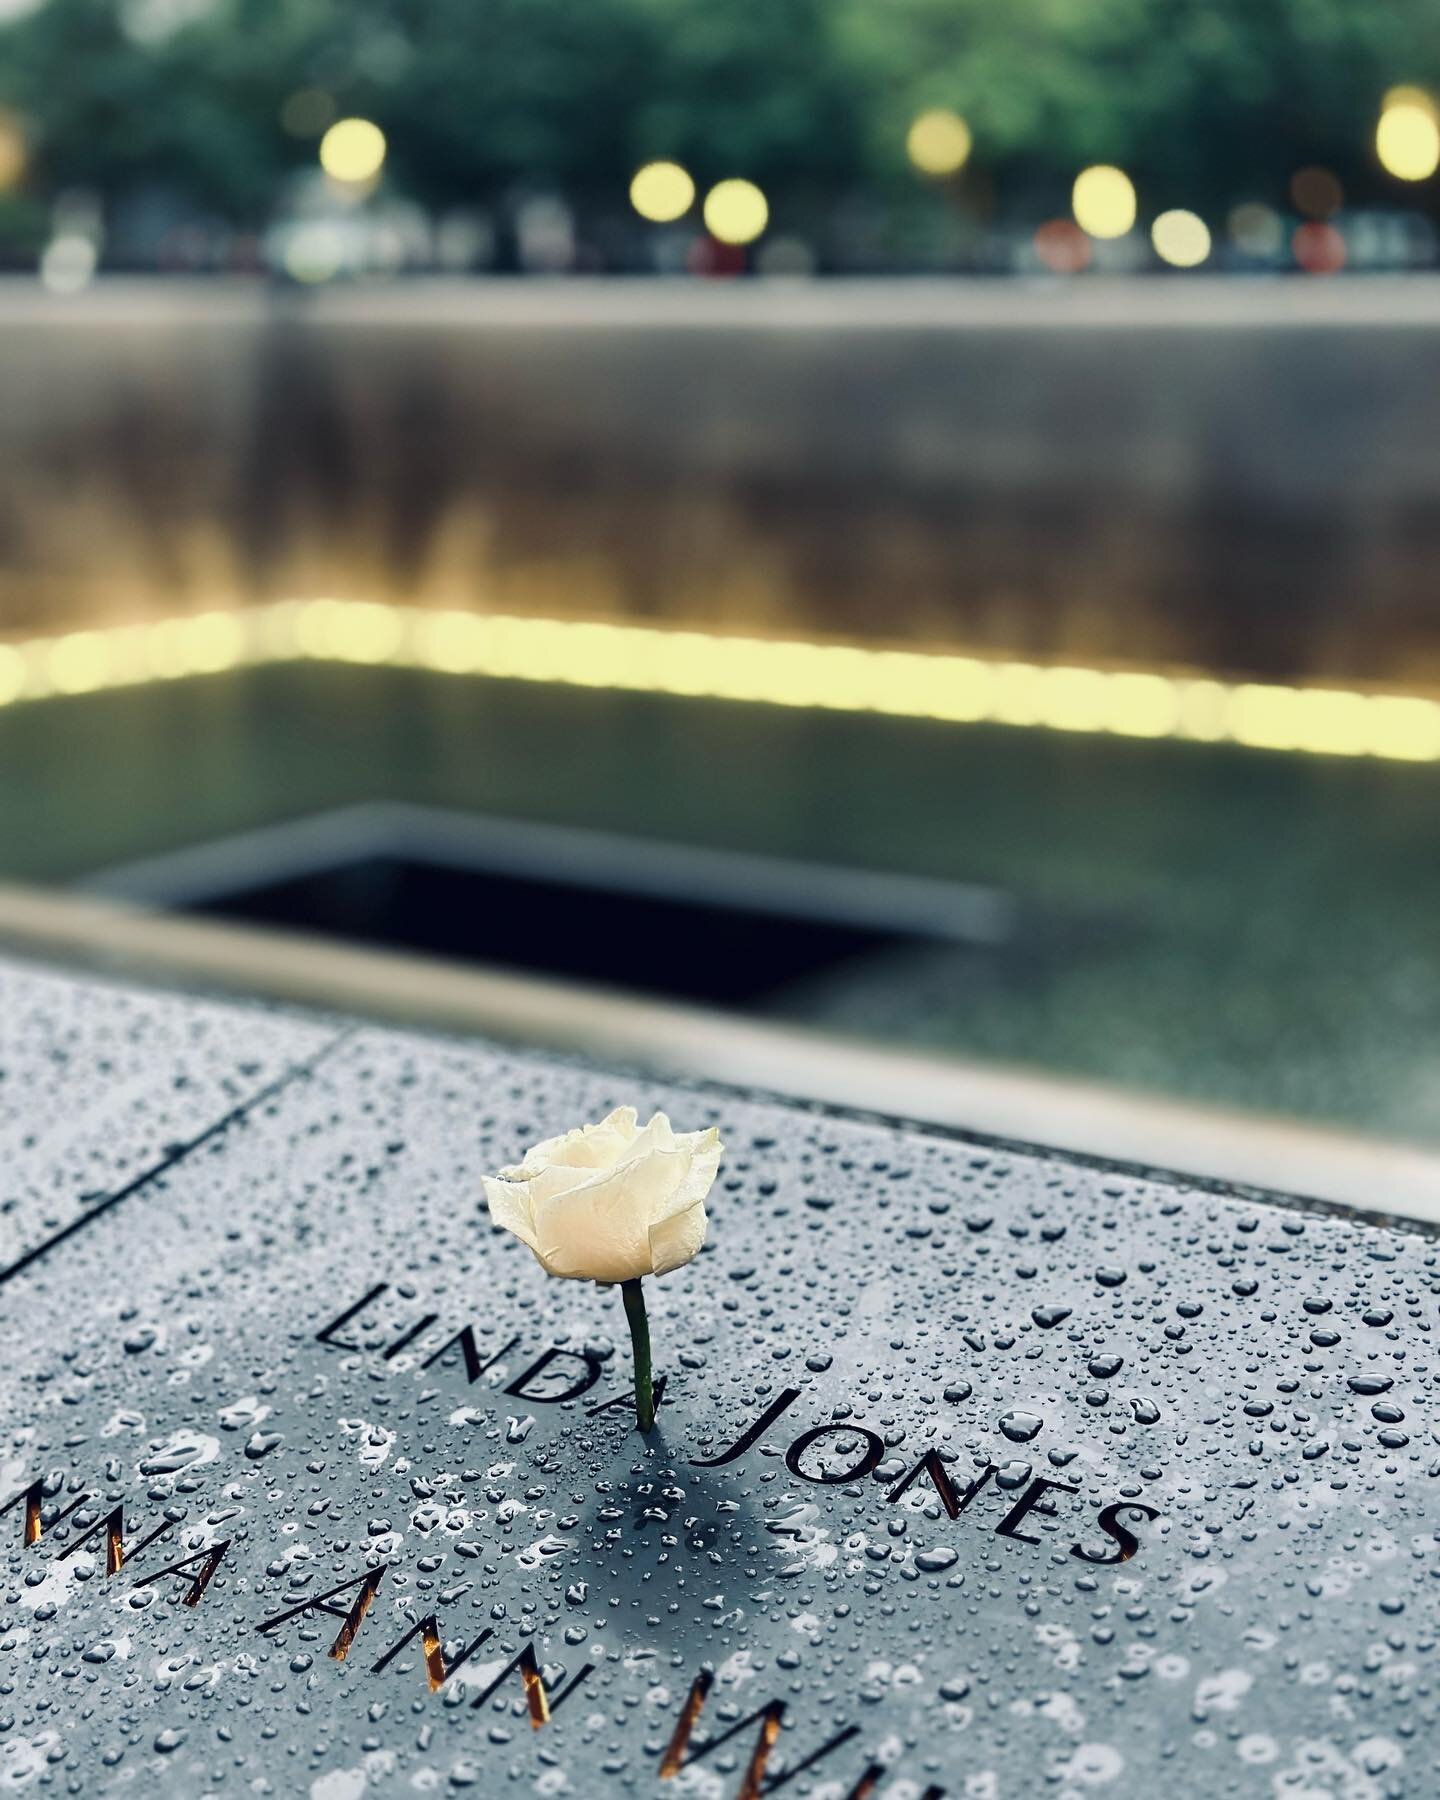 It&rsquo;s been 22 years since the 9/11 attacks. We visited the memorial while in NYC this year. It&rsquo;s definitely worth a visit.